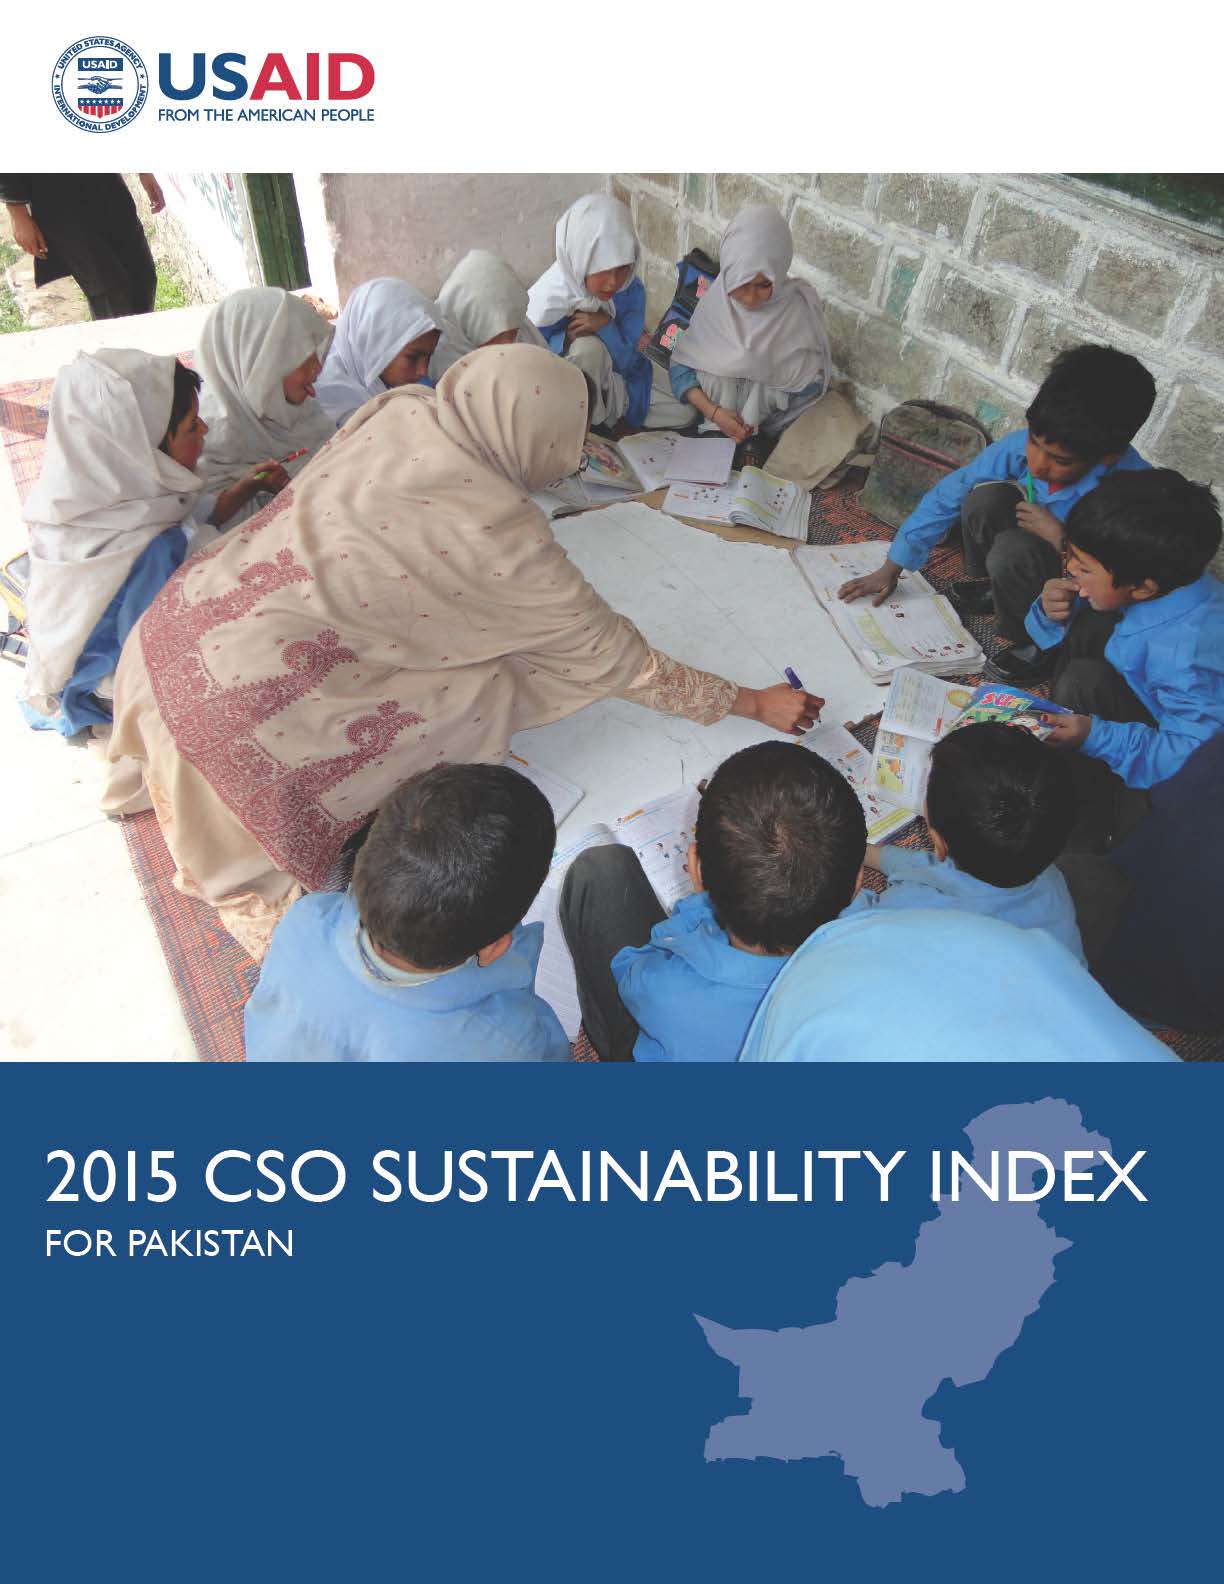 The 2015 CSO Sustainability Index for Pakistan